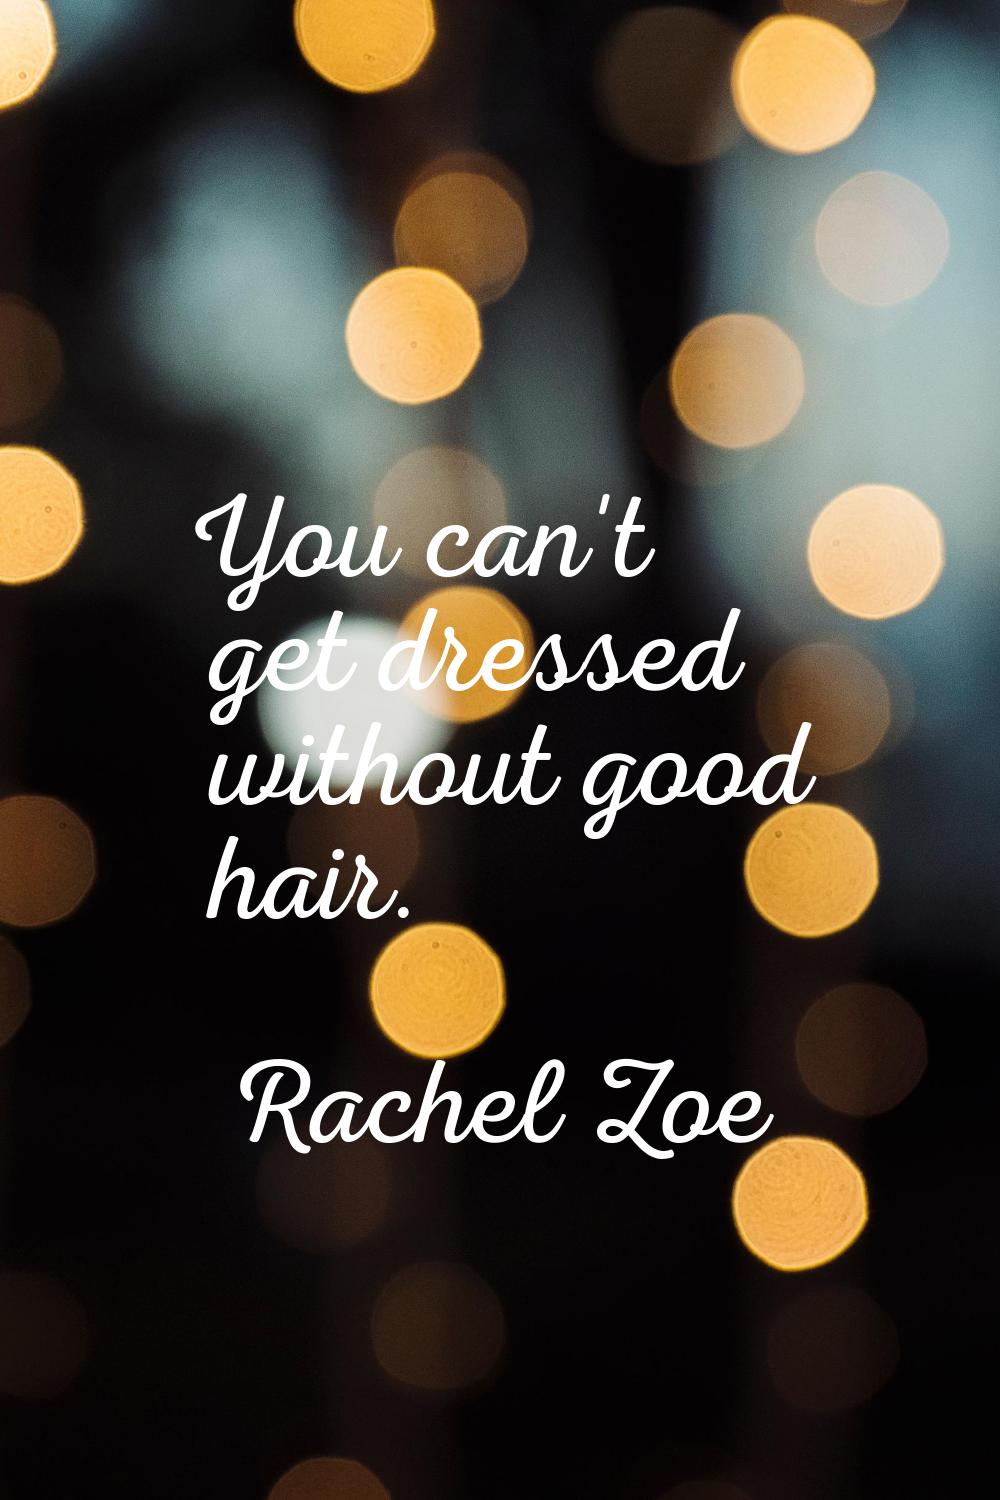 You can't get dressed without good hair.